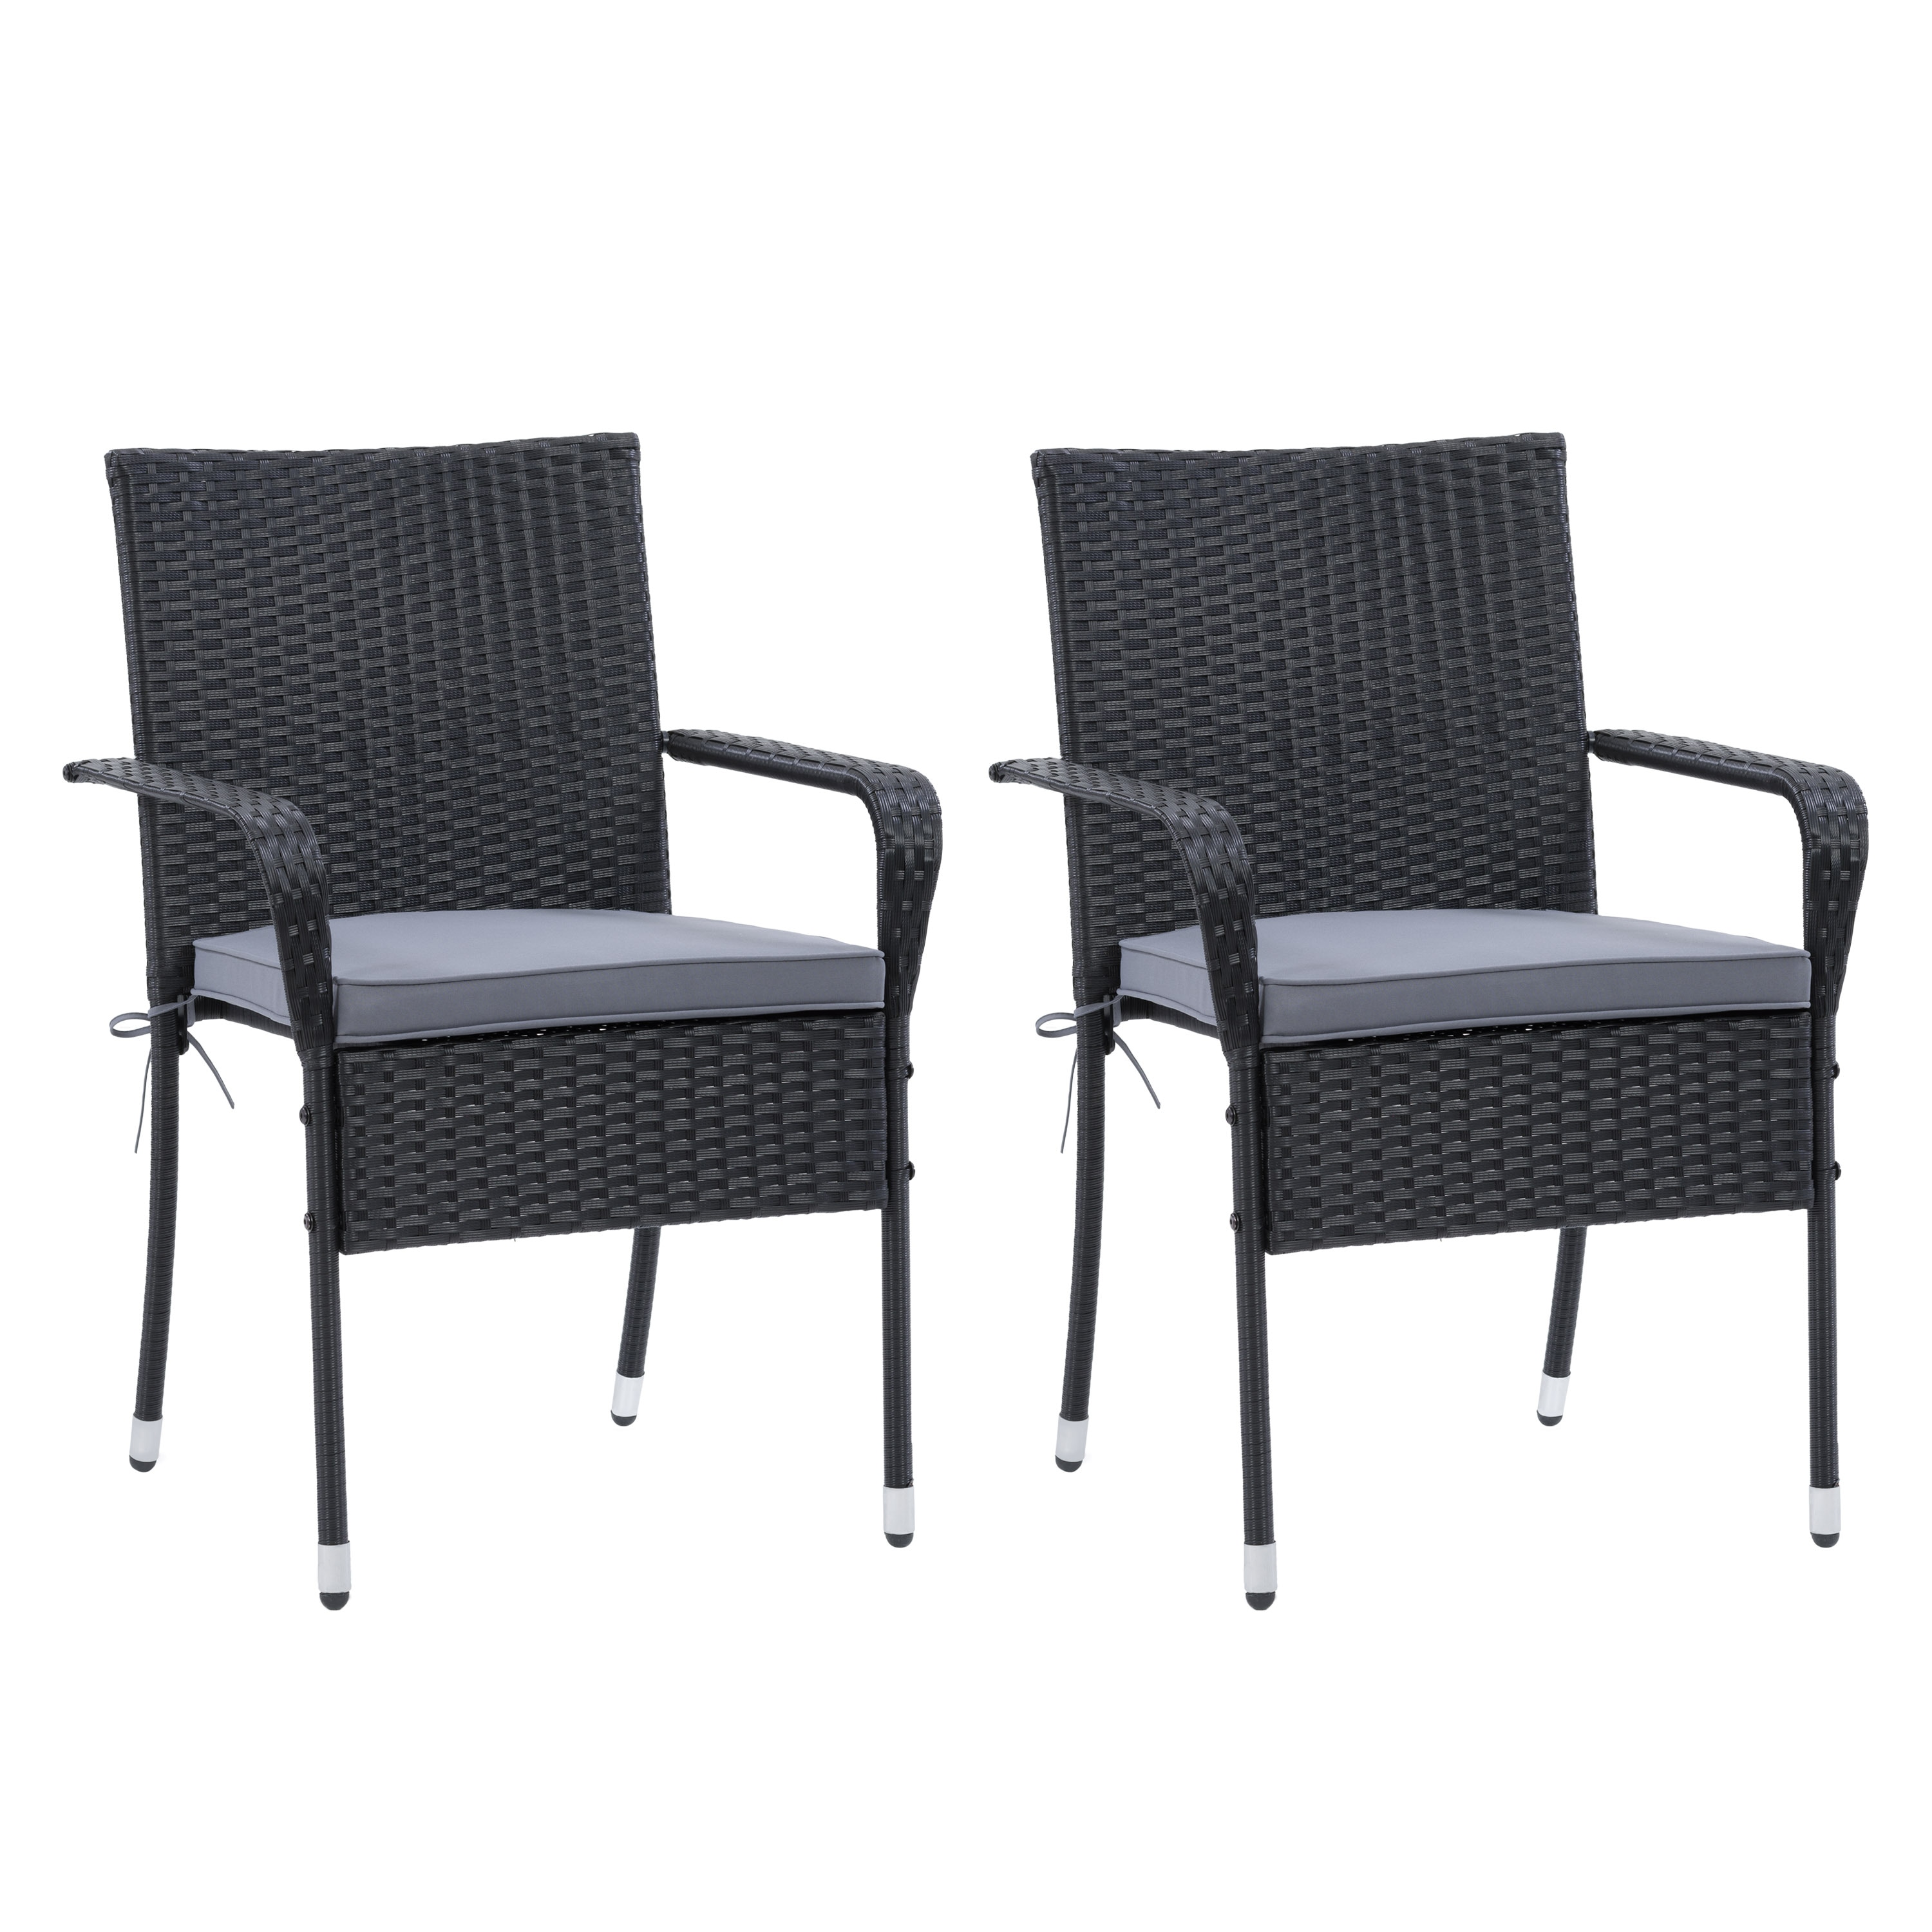 Parksville Set of 2 Wicker Stackable Black Steel Frame Stationary Dining Chair(s) with Gray Cushioned Seat | - CorLiving PRK-700-C